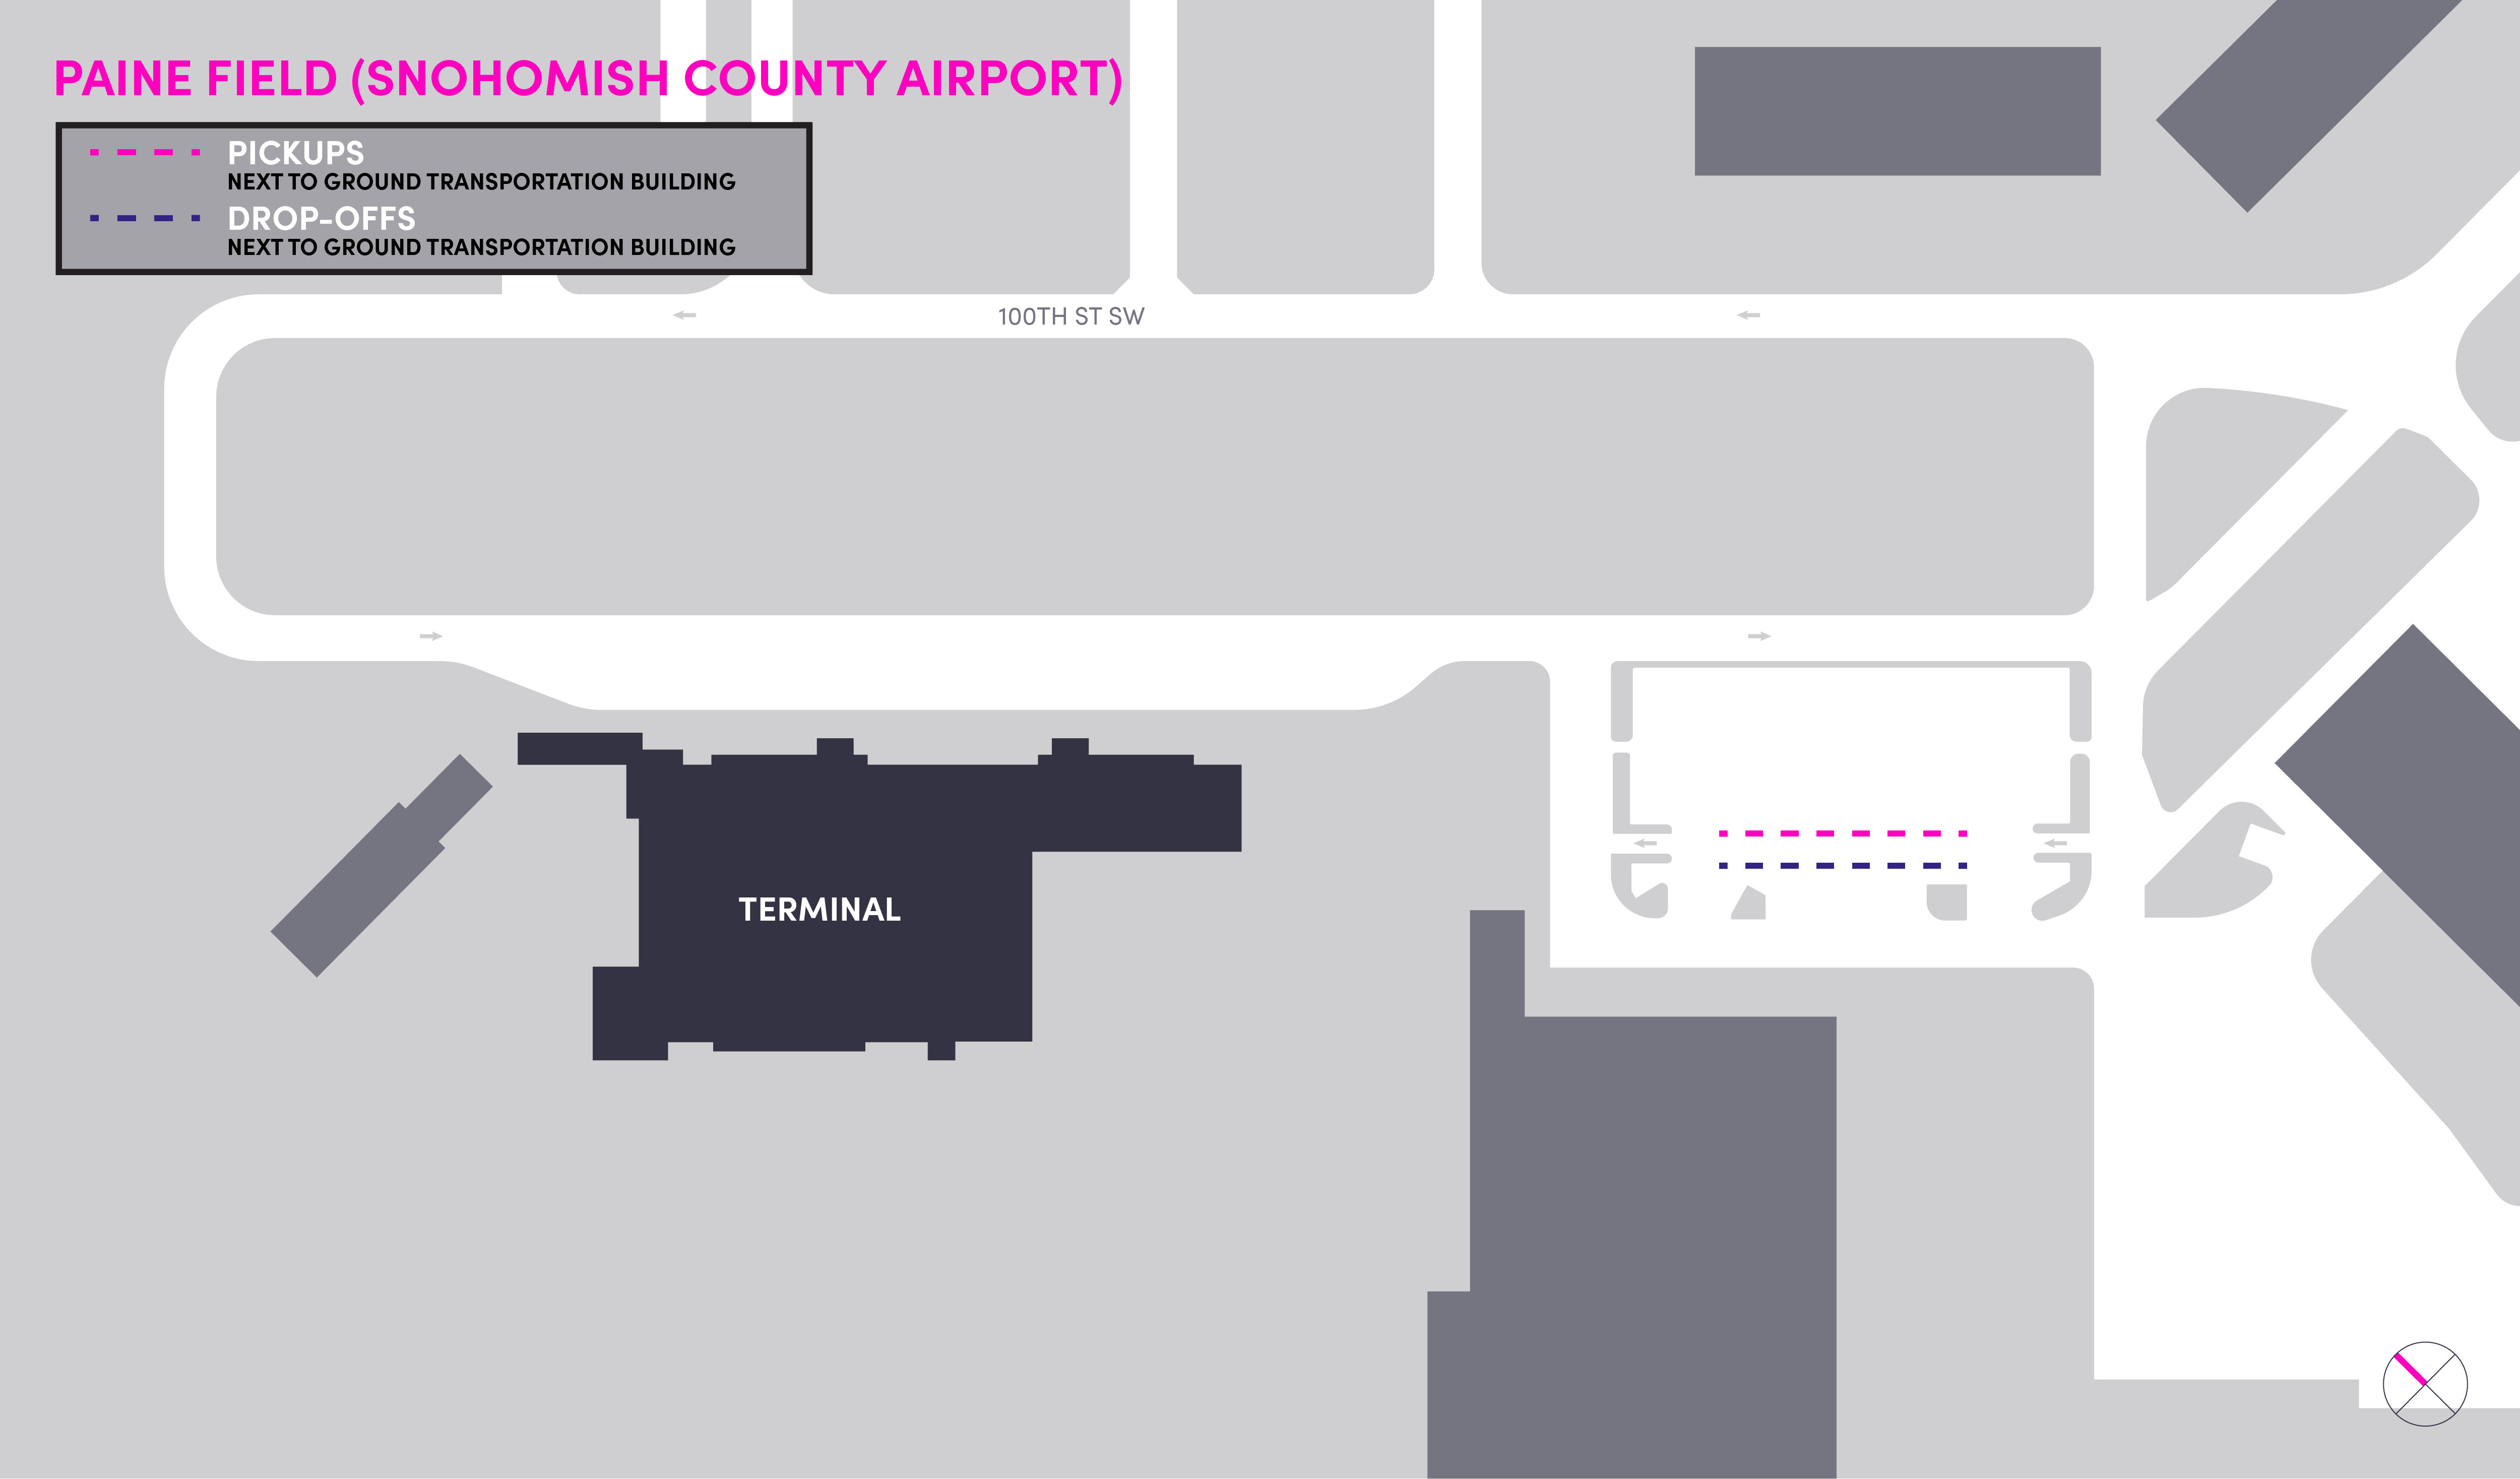 Mapa do Paine Field Snohomish County Airport